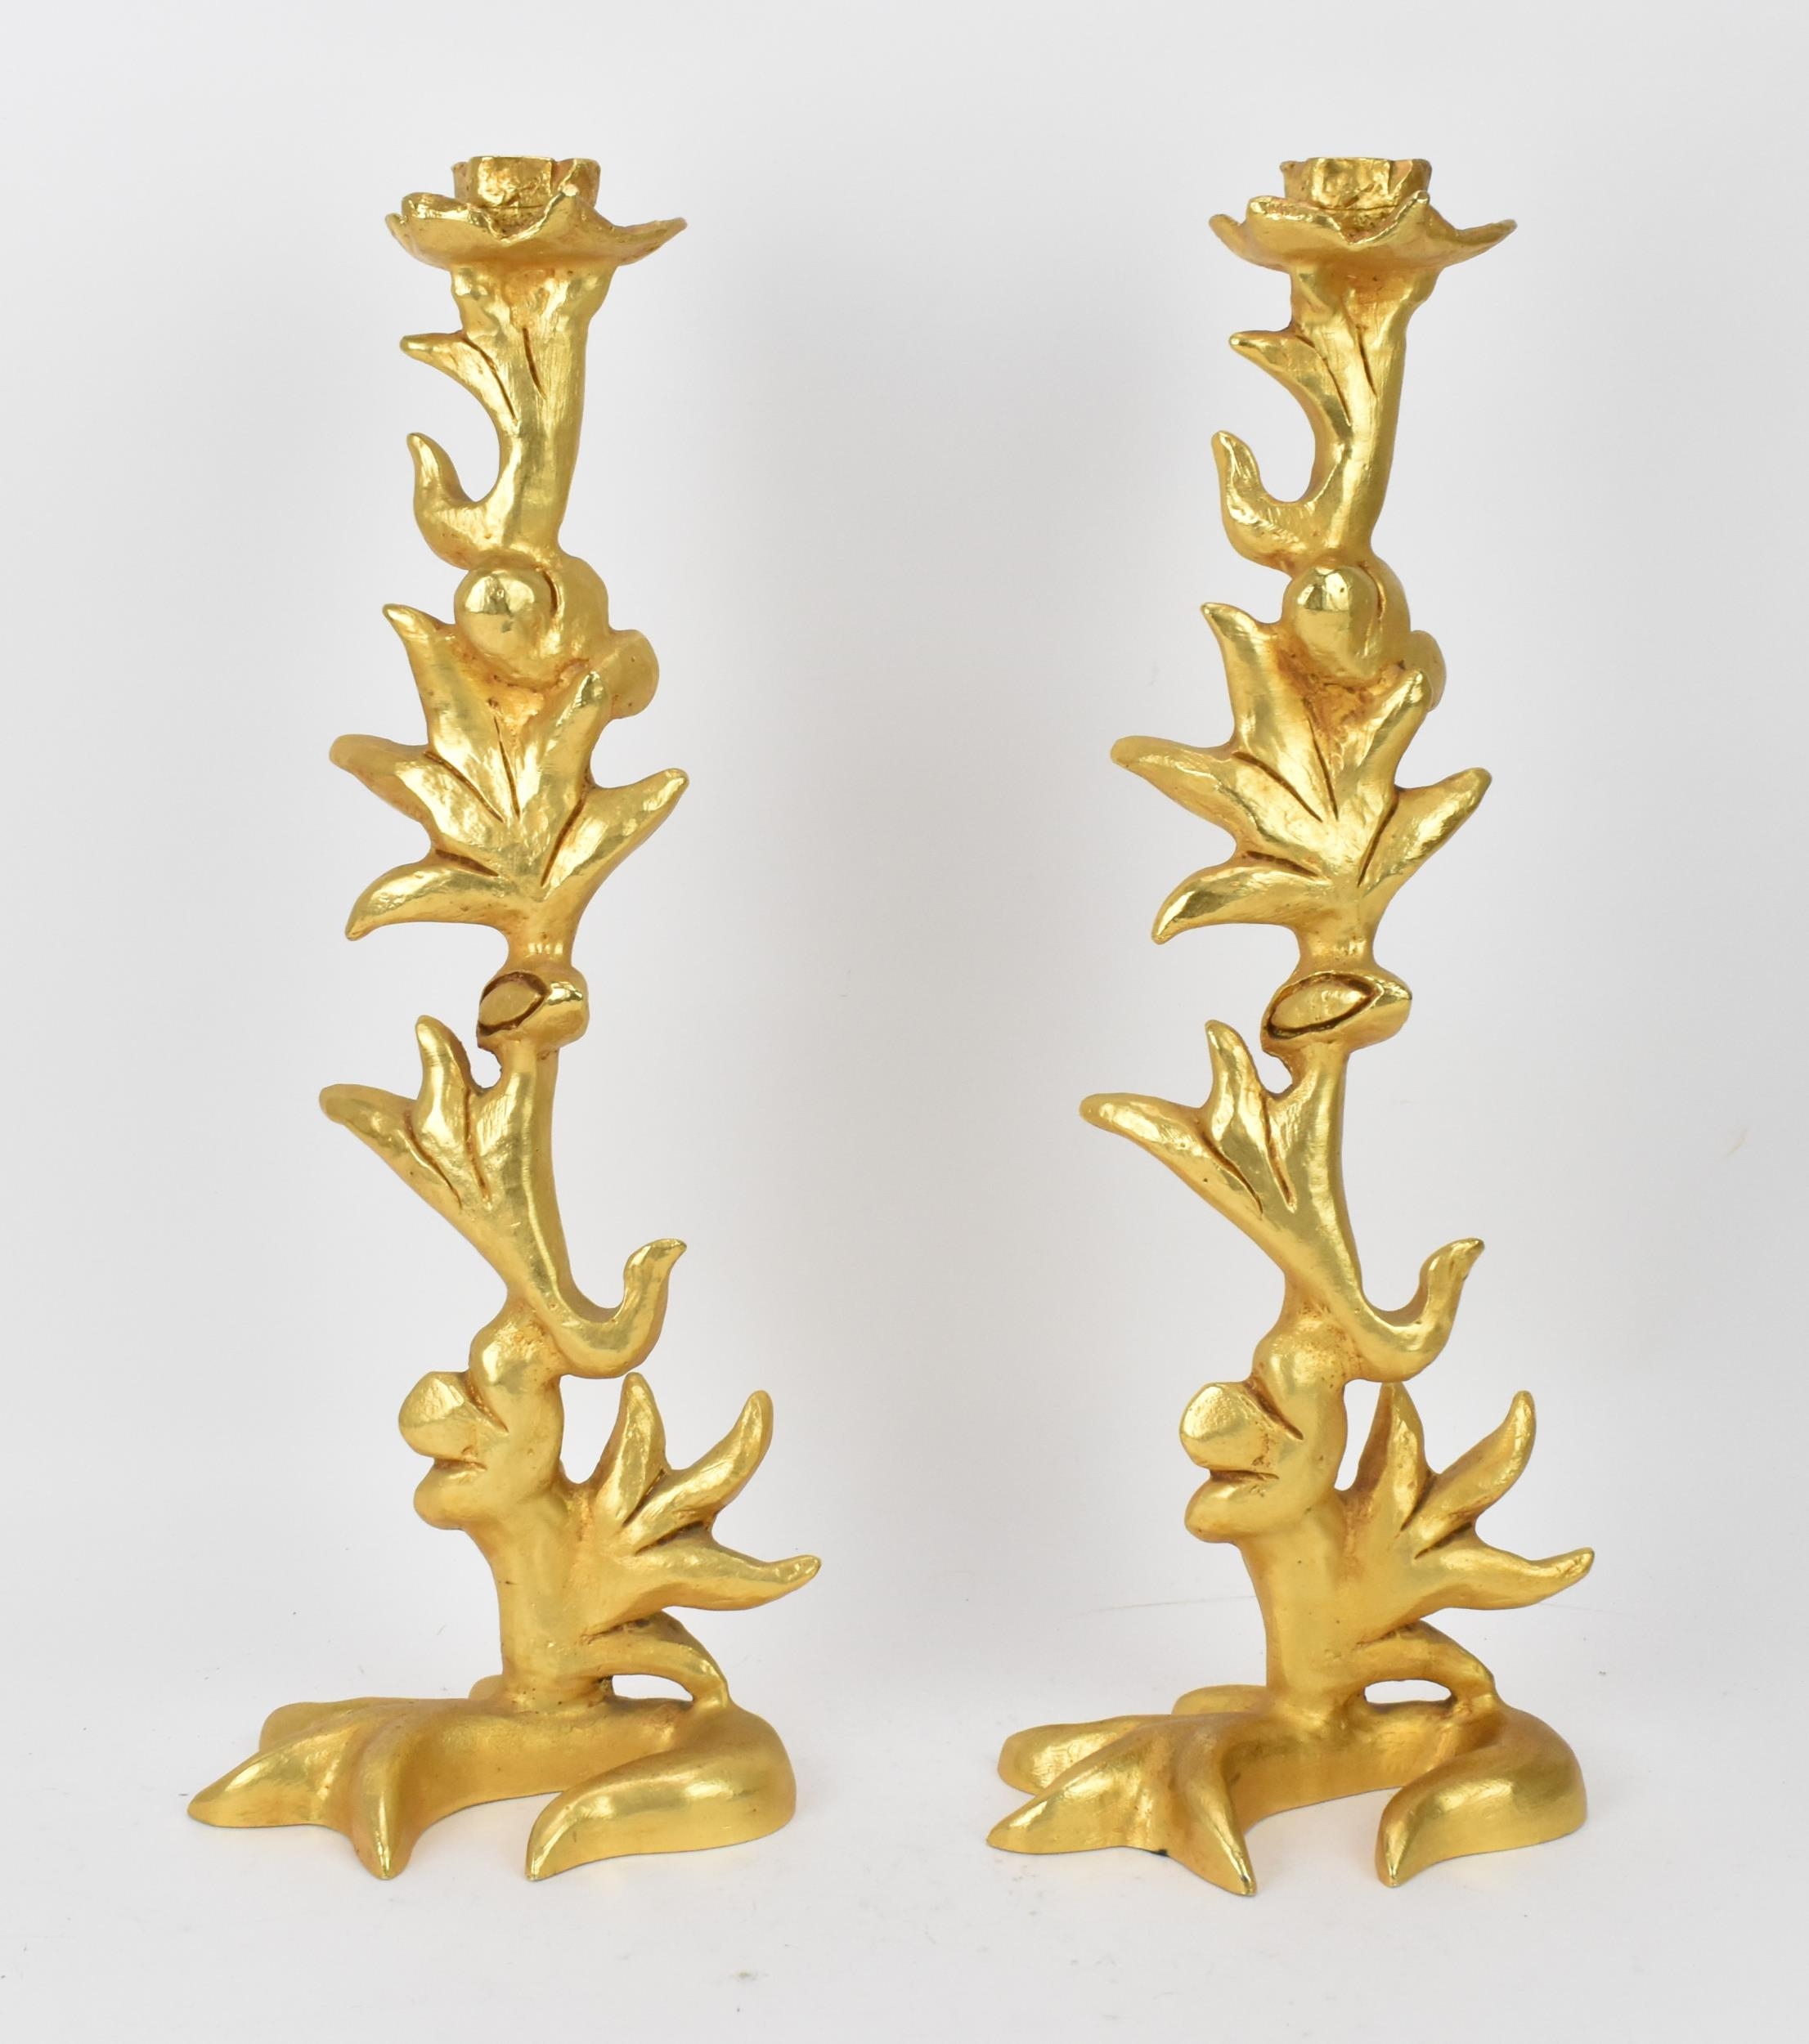 A pair of 1970s gilt-bronze candlesticks by Georges Mathias for Fondica, of naturalistic foliate